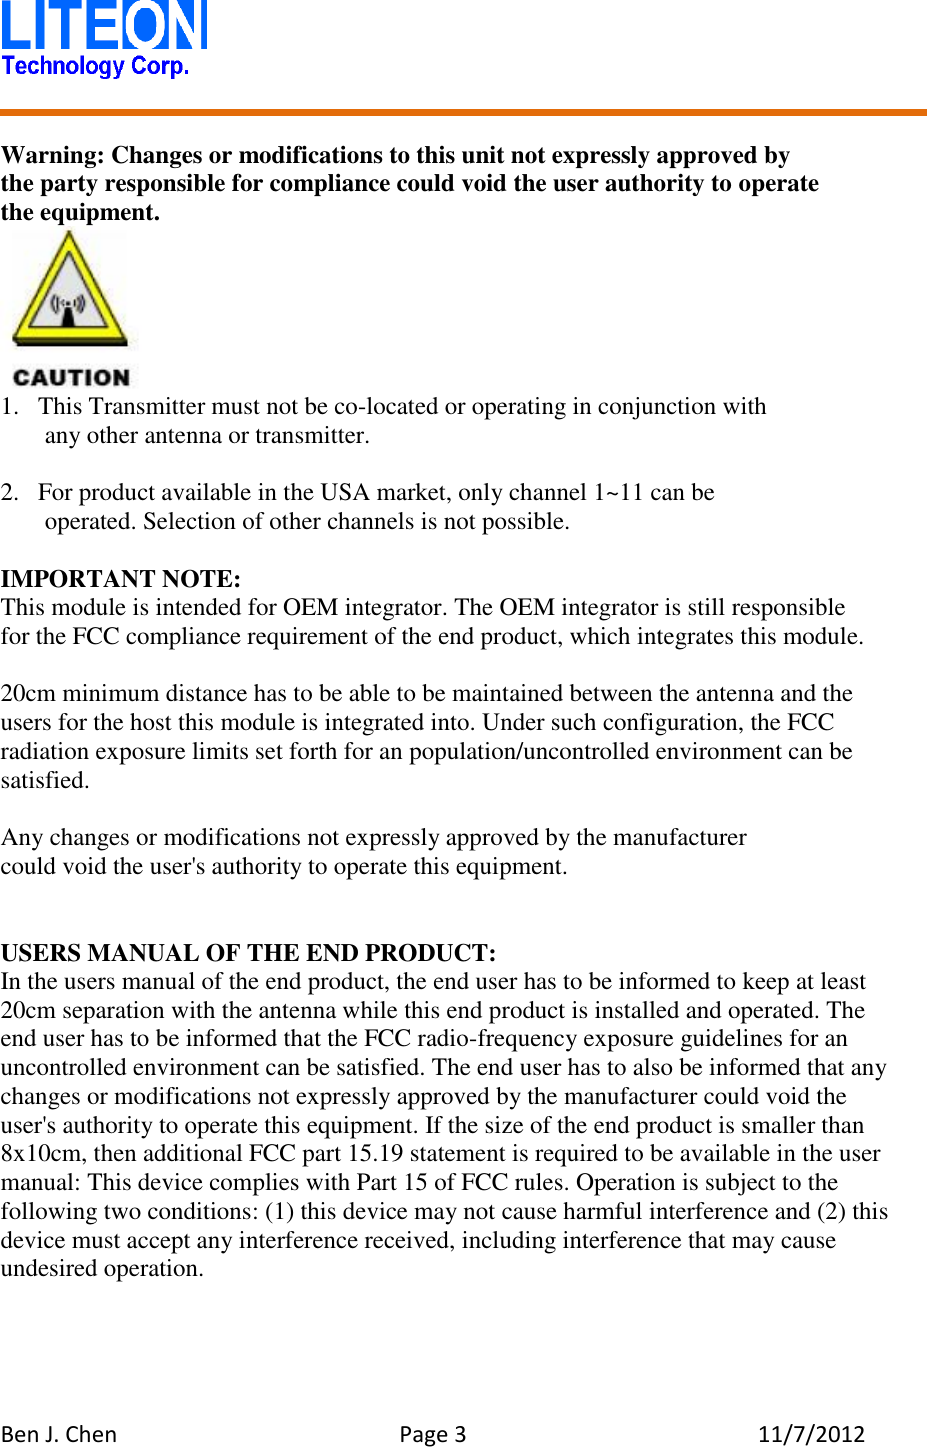   Ben J. Chen  Page 3  11/7/2012    Warning: Changes or modifications to this unit not expressly approved by the party responsible for compliance could void the user authority to operate   the equipment.  1. This Transmitter must not be co-located or operating in conjunction with any other antenna or transmitter.  2. For product available in the USA market, only channel 1~11 can be operated. Selection of other channels is not possible.  IMPORTANT NOTE: This module is intended for OEM integrator. The OEM integrator is still responsible   for the FCC compliance requirement of the end product, which integrates this module.  20cm minimum distance has to be able to be maintained between the antenna and the users for the host this module is integrated into. Under such configuration, the FCC radiation exposure limits set forth for an population/uncontrolled environment can be satisfied.  Any changes or modifications not expressly approved by the manufacturer could void the user&apos;s authority to operate this equipment.   USERS MANUAL OF THE END PRODUCT: In the users manual of the end product, the end user has to be informed to keep at least 20cm separation with the antenna while this end product is installed and operated. The end user has to be informed that the FCC radio-frequency exposure guidelines for an uncontrolled environment can be satisfied. The end user has to also be informed that any changes or modifications not expressly approved by the manufacturer could void the user&apos;s authority to operate this equipment. If the size of the end product is smaller than 8x10cm, then additional FCC part 15.19 statement is required to be available in the user manual: This device complies with Part 15 of FCC rules. Operation is subject to the following two conditions: (1) this device may not cause harmful interference and (2) this device must accept any interference received, including interference that may cause undesired operation. 